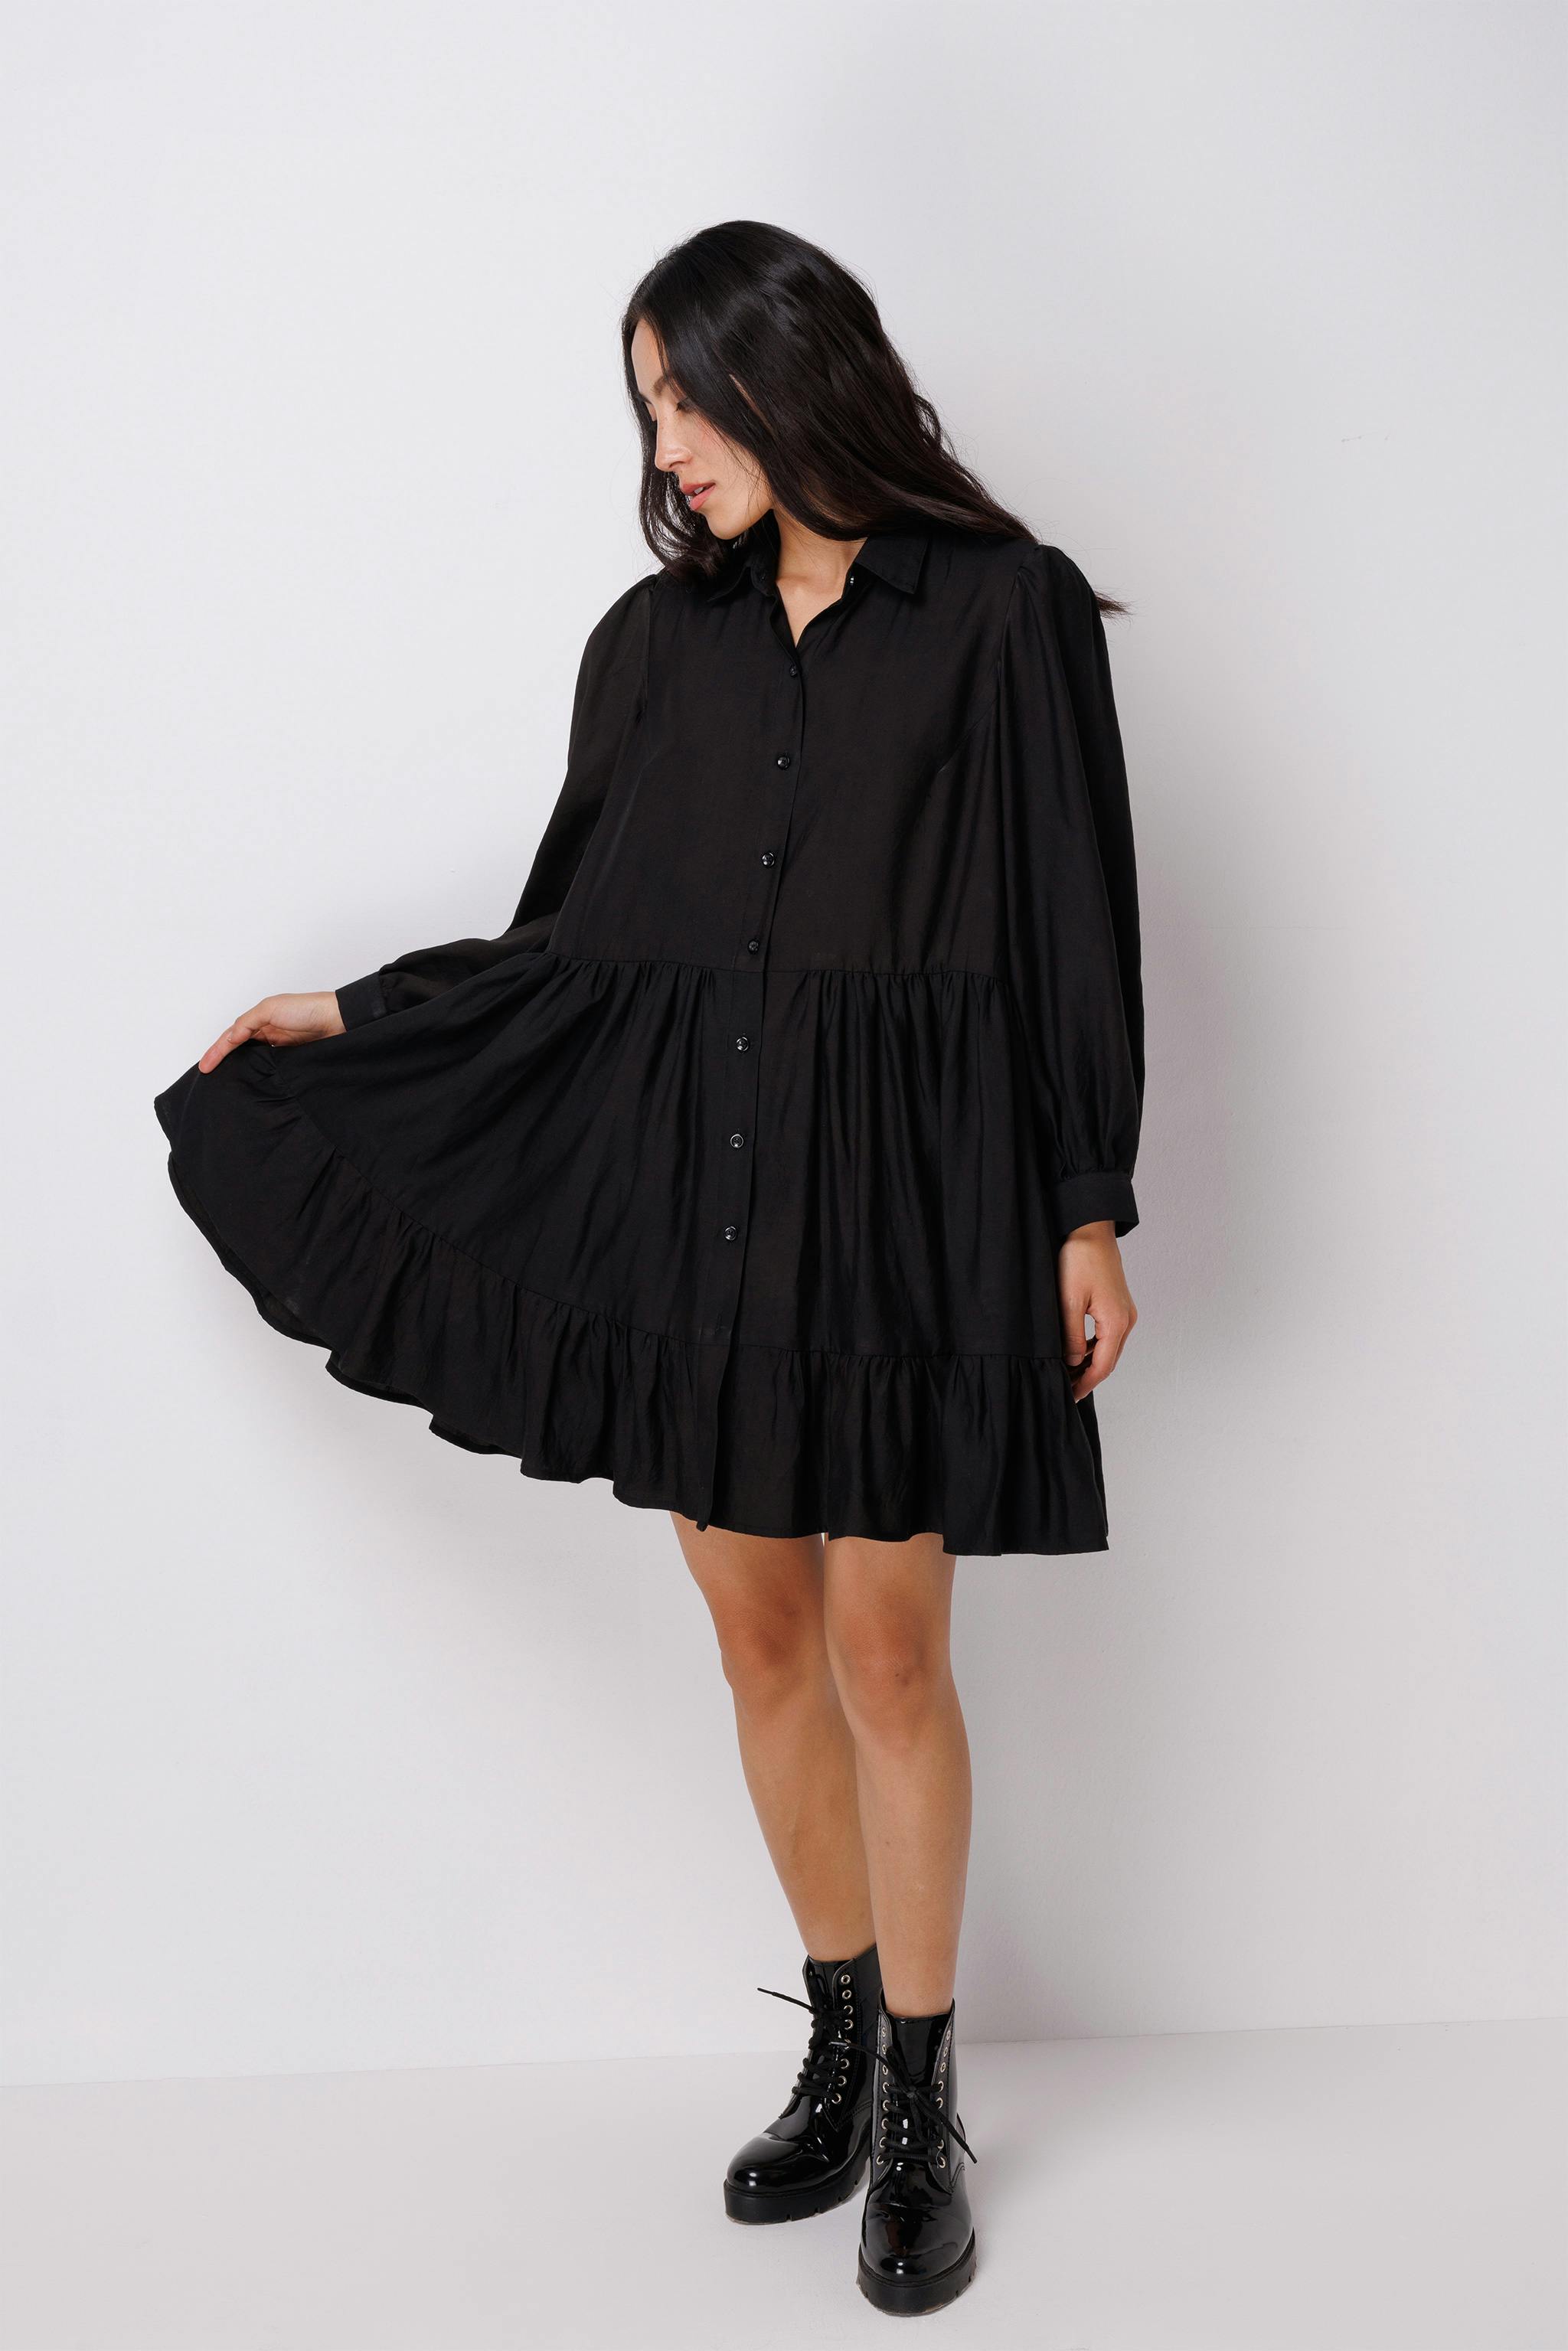 Black Frill Dress, a product by House of Sangai